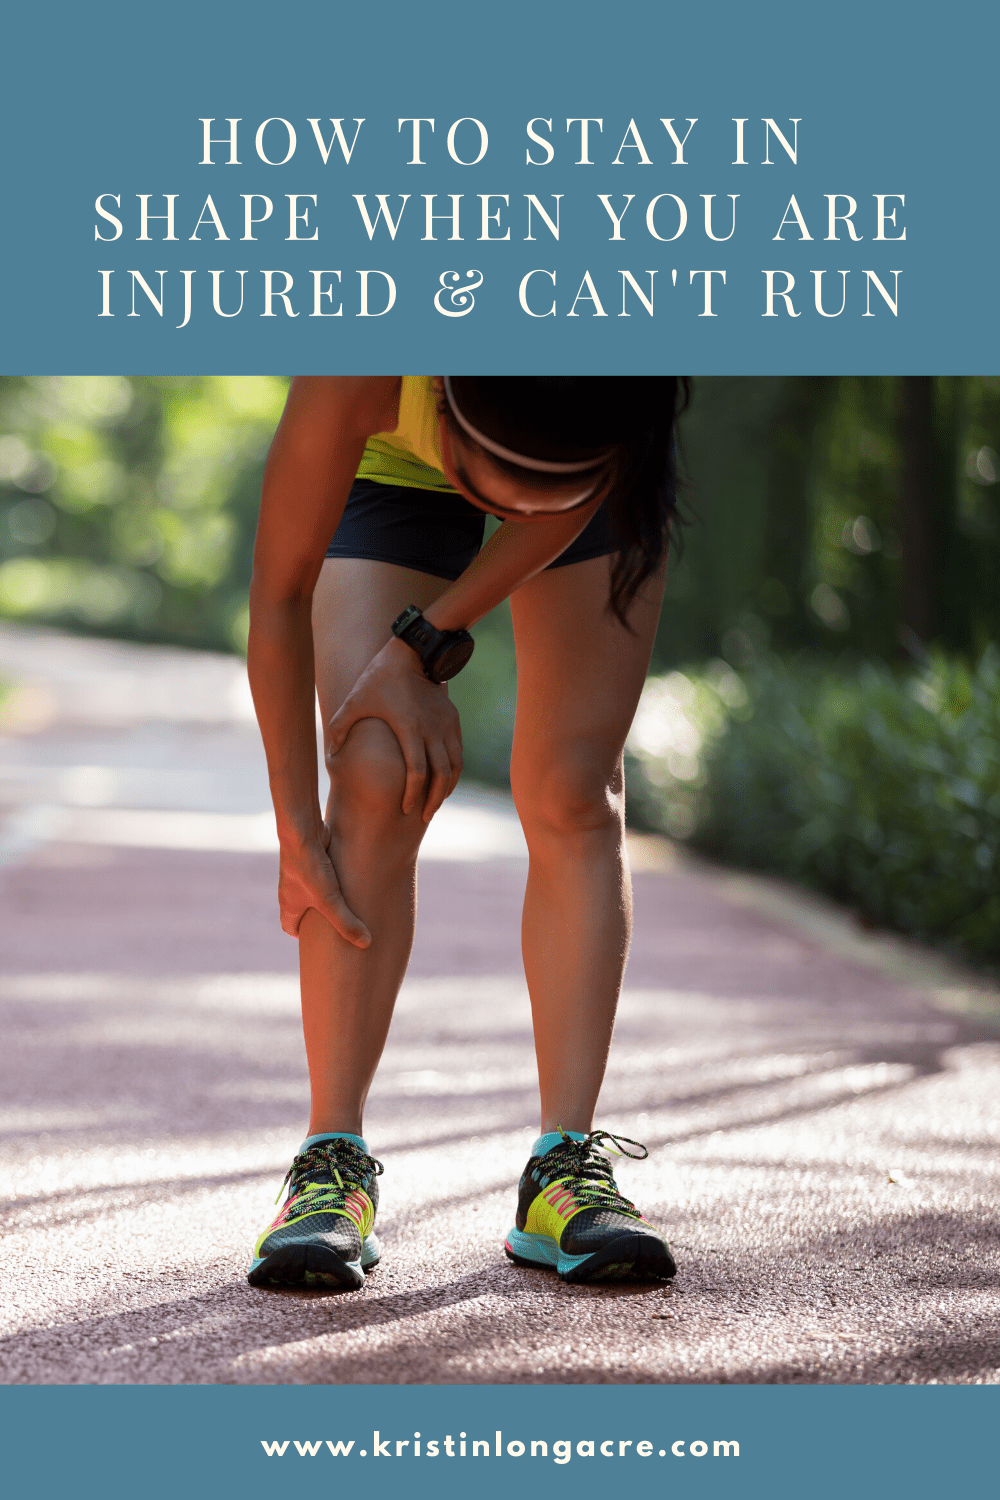 How to Stay in Shape When You Are Injured & Can't Run